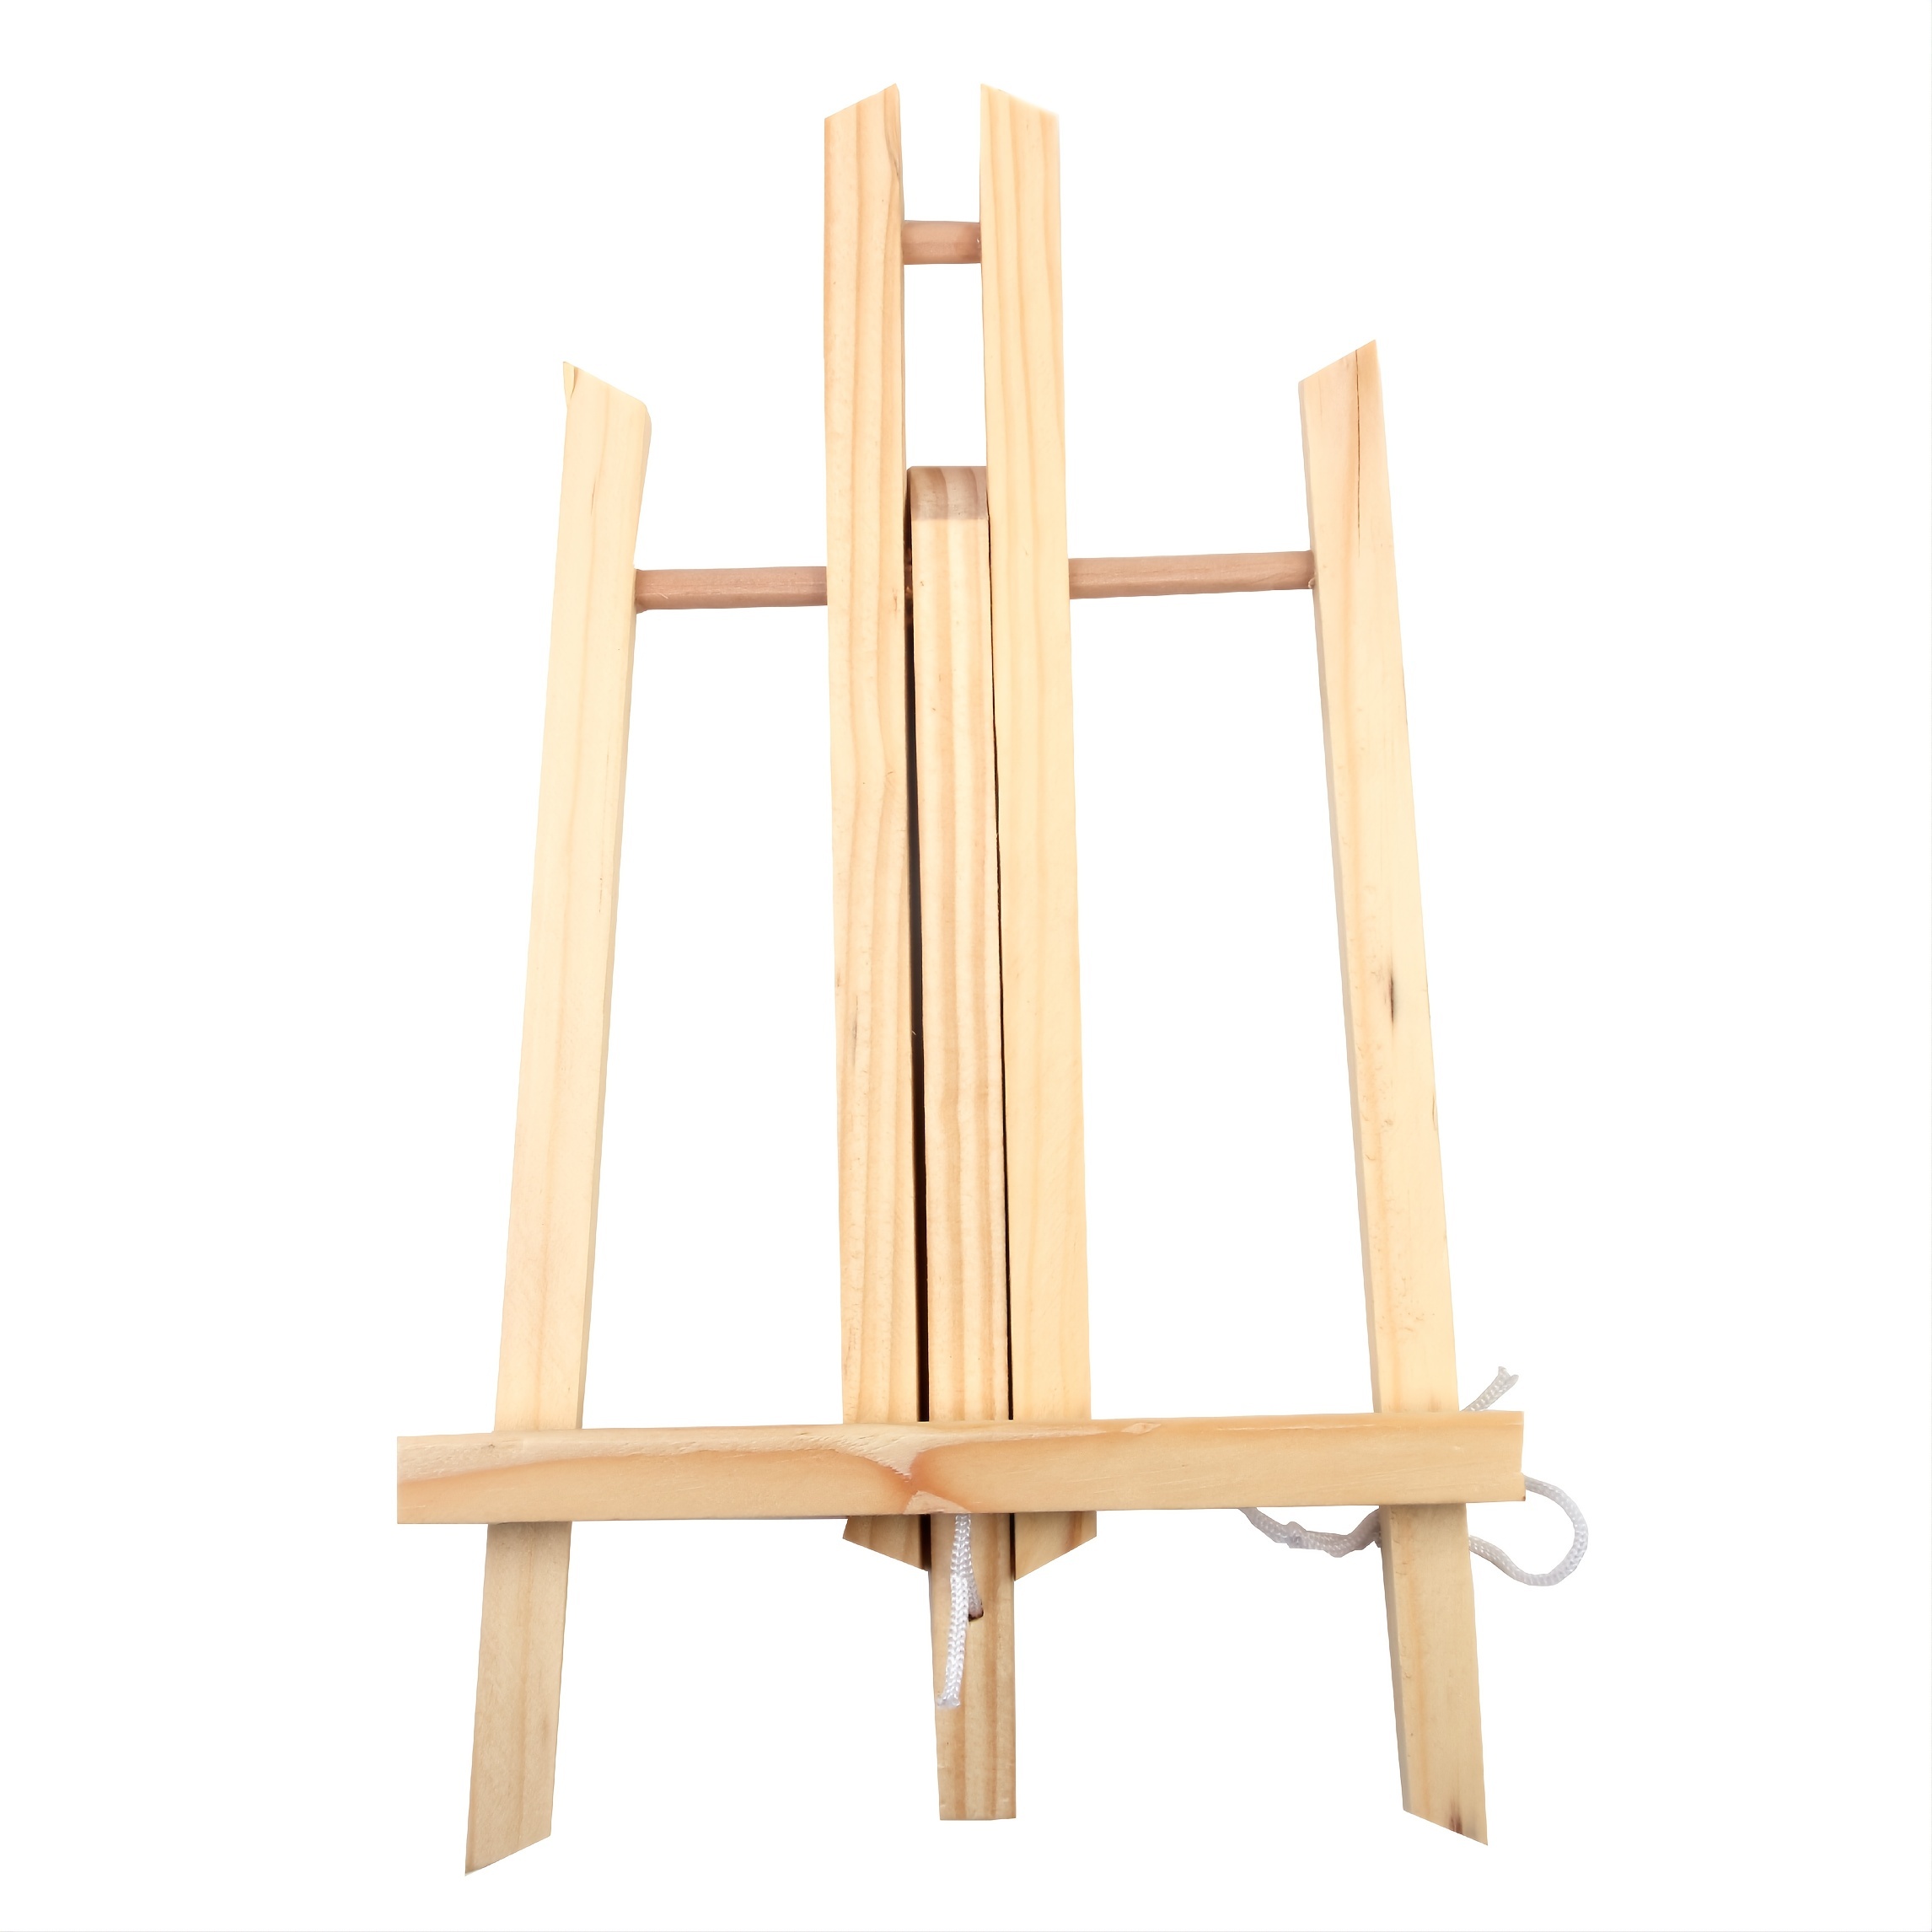 WOODEN EASEL STAND > Solid Wooden Tabletop Artist Studio Easel